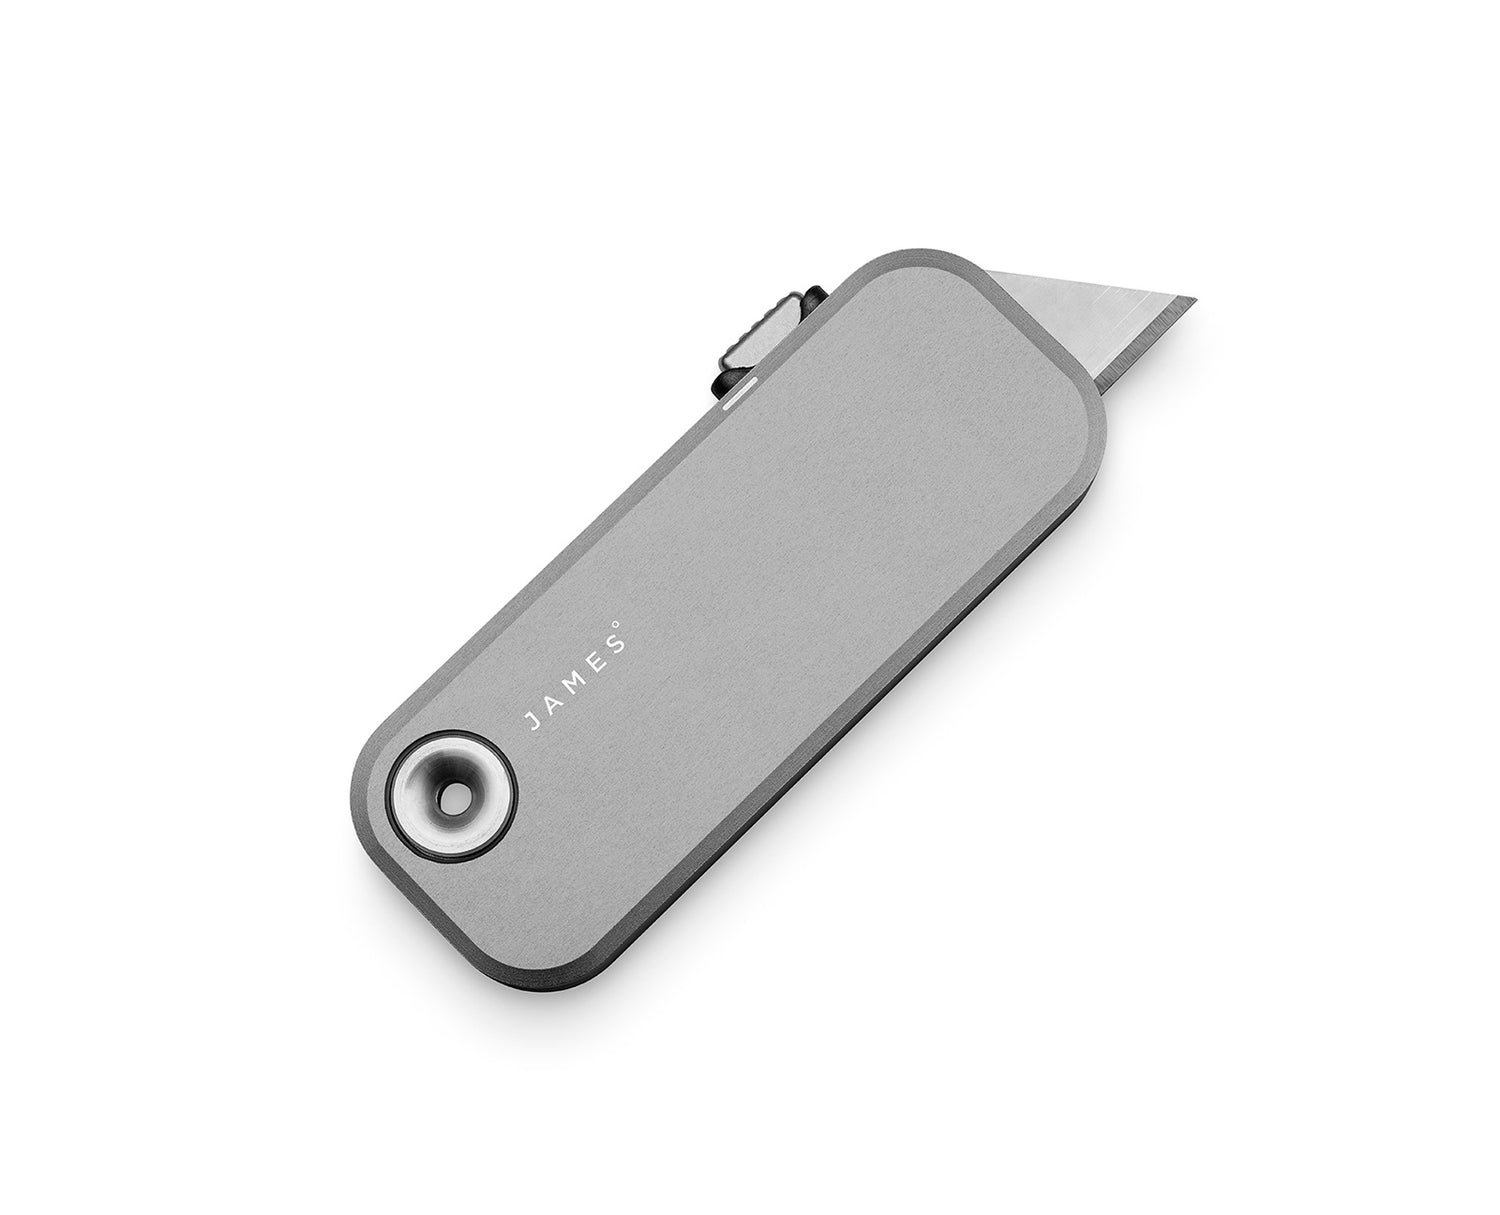 The Palmer knife with gray colored case.